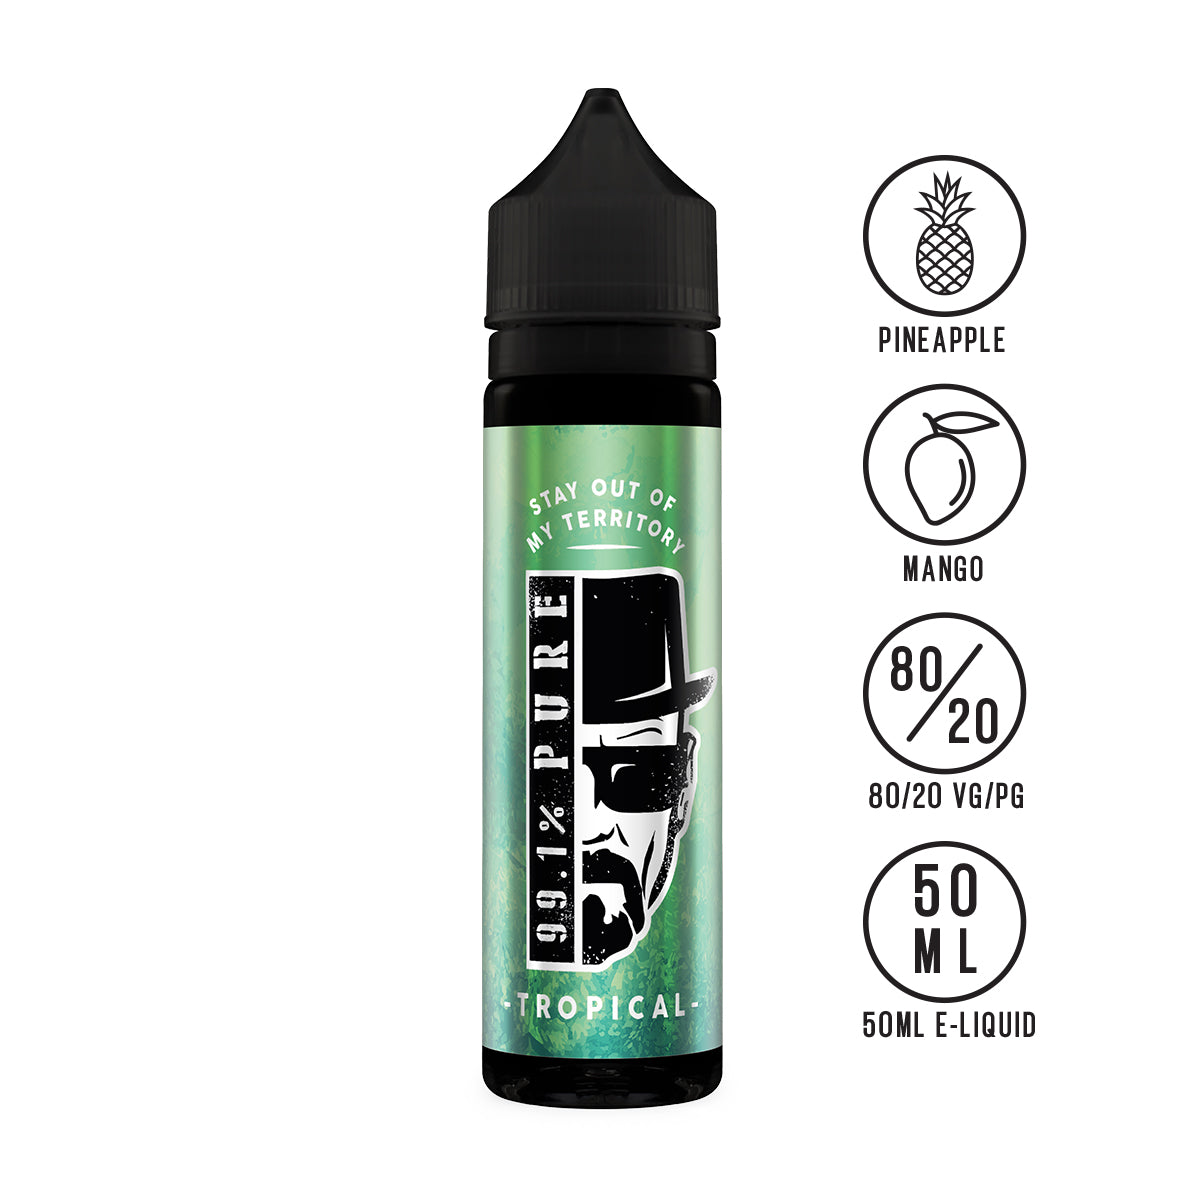 99.1% Pure - Tropical 50ml - The Ace Of Vapez